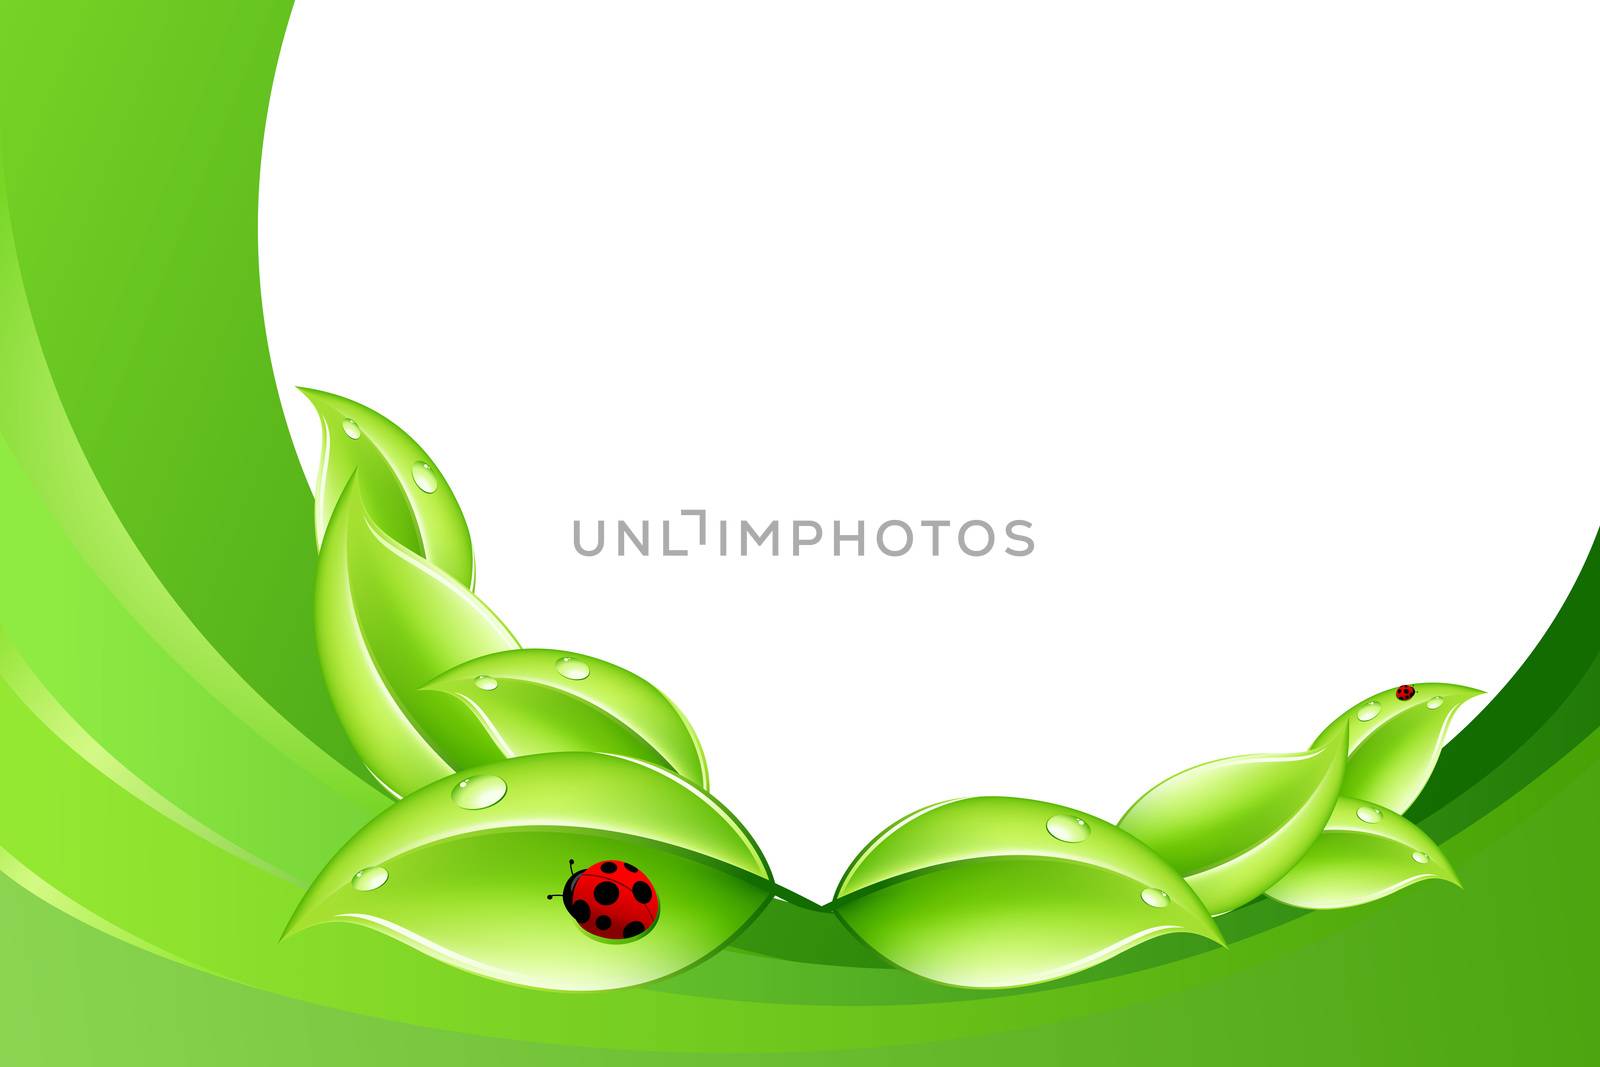 Abstract nature concept in green color with Ladybug